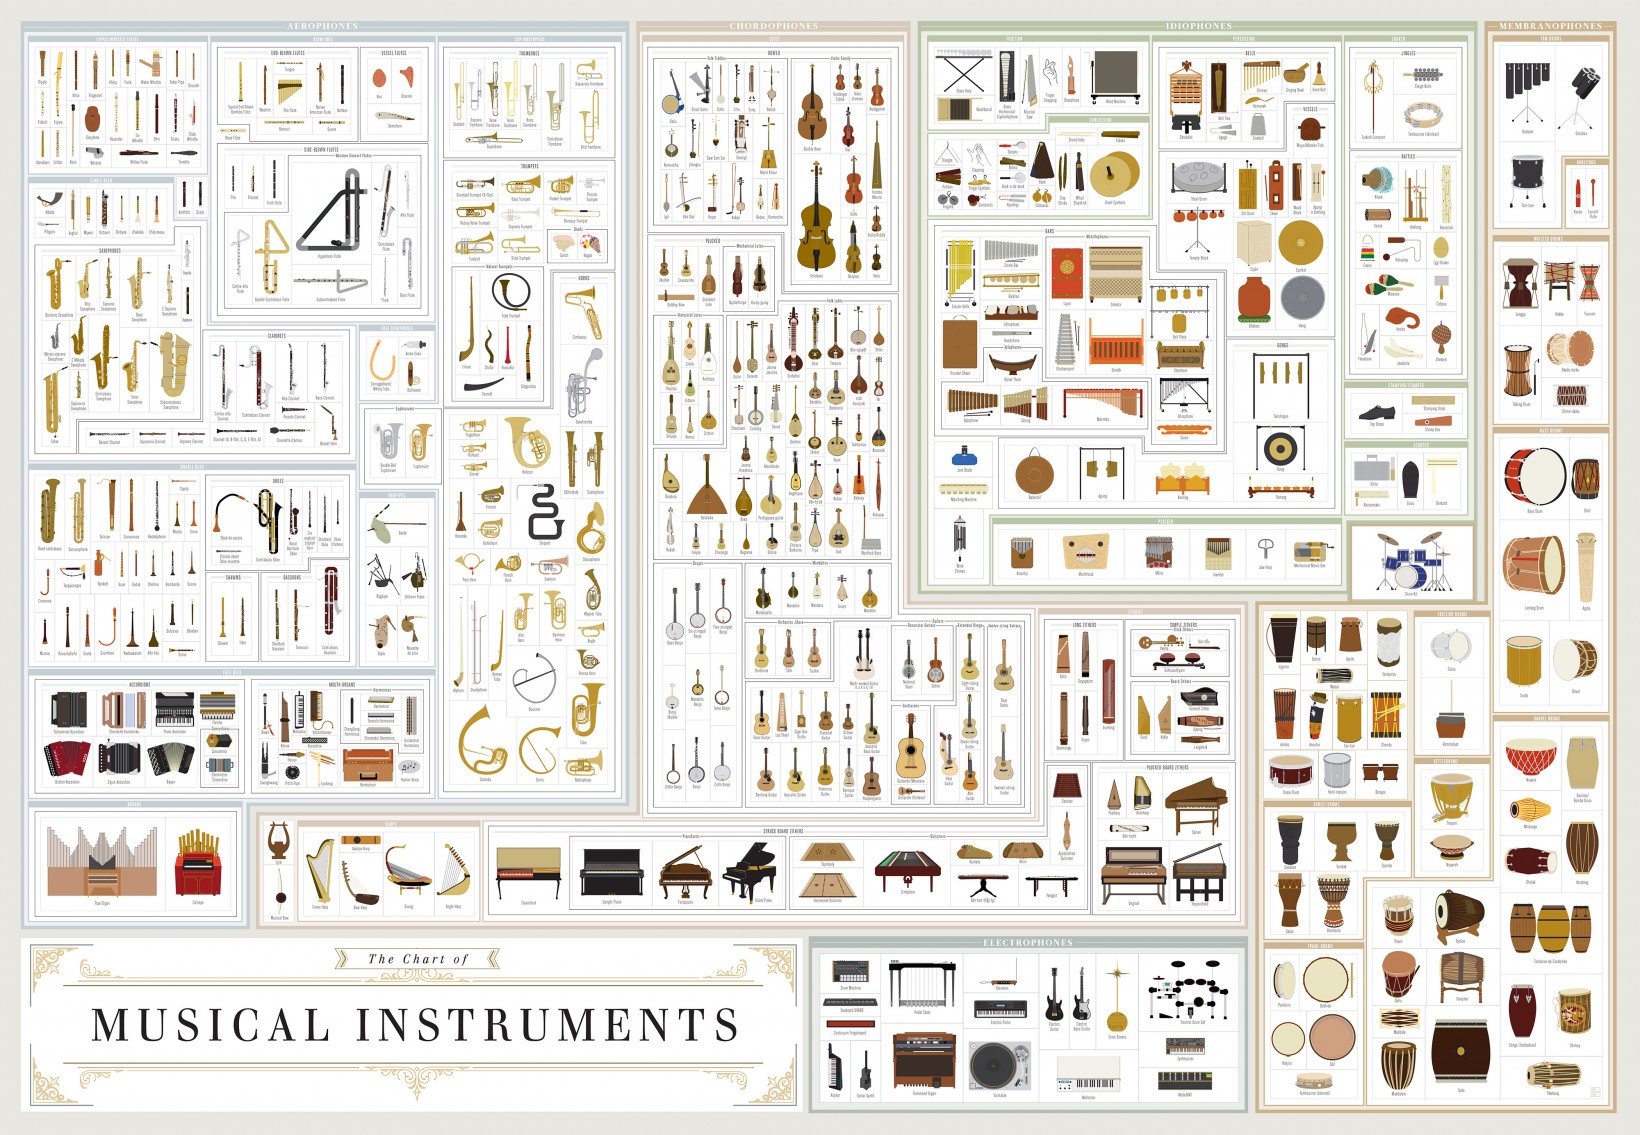 The chart of musical instruments